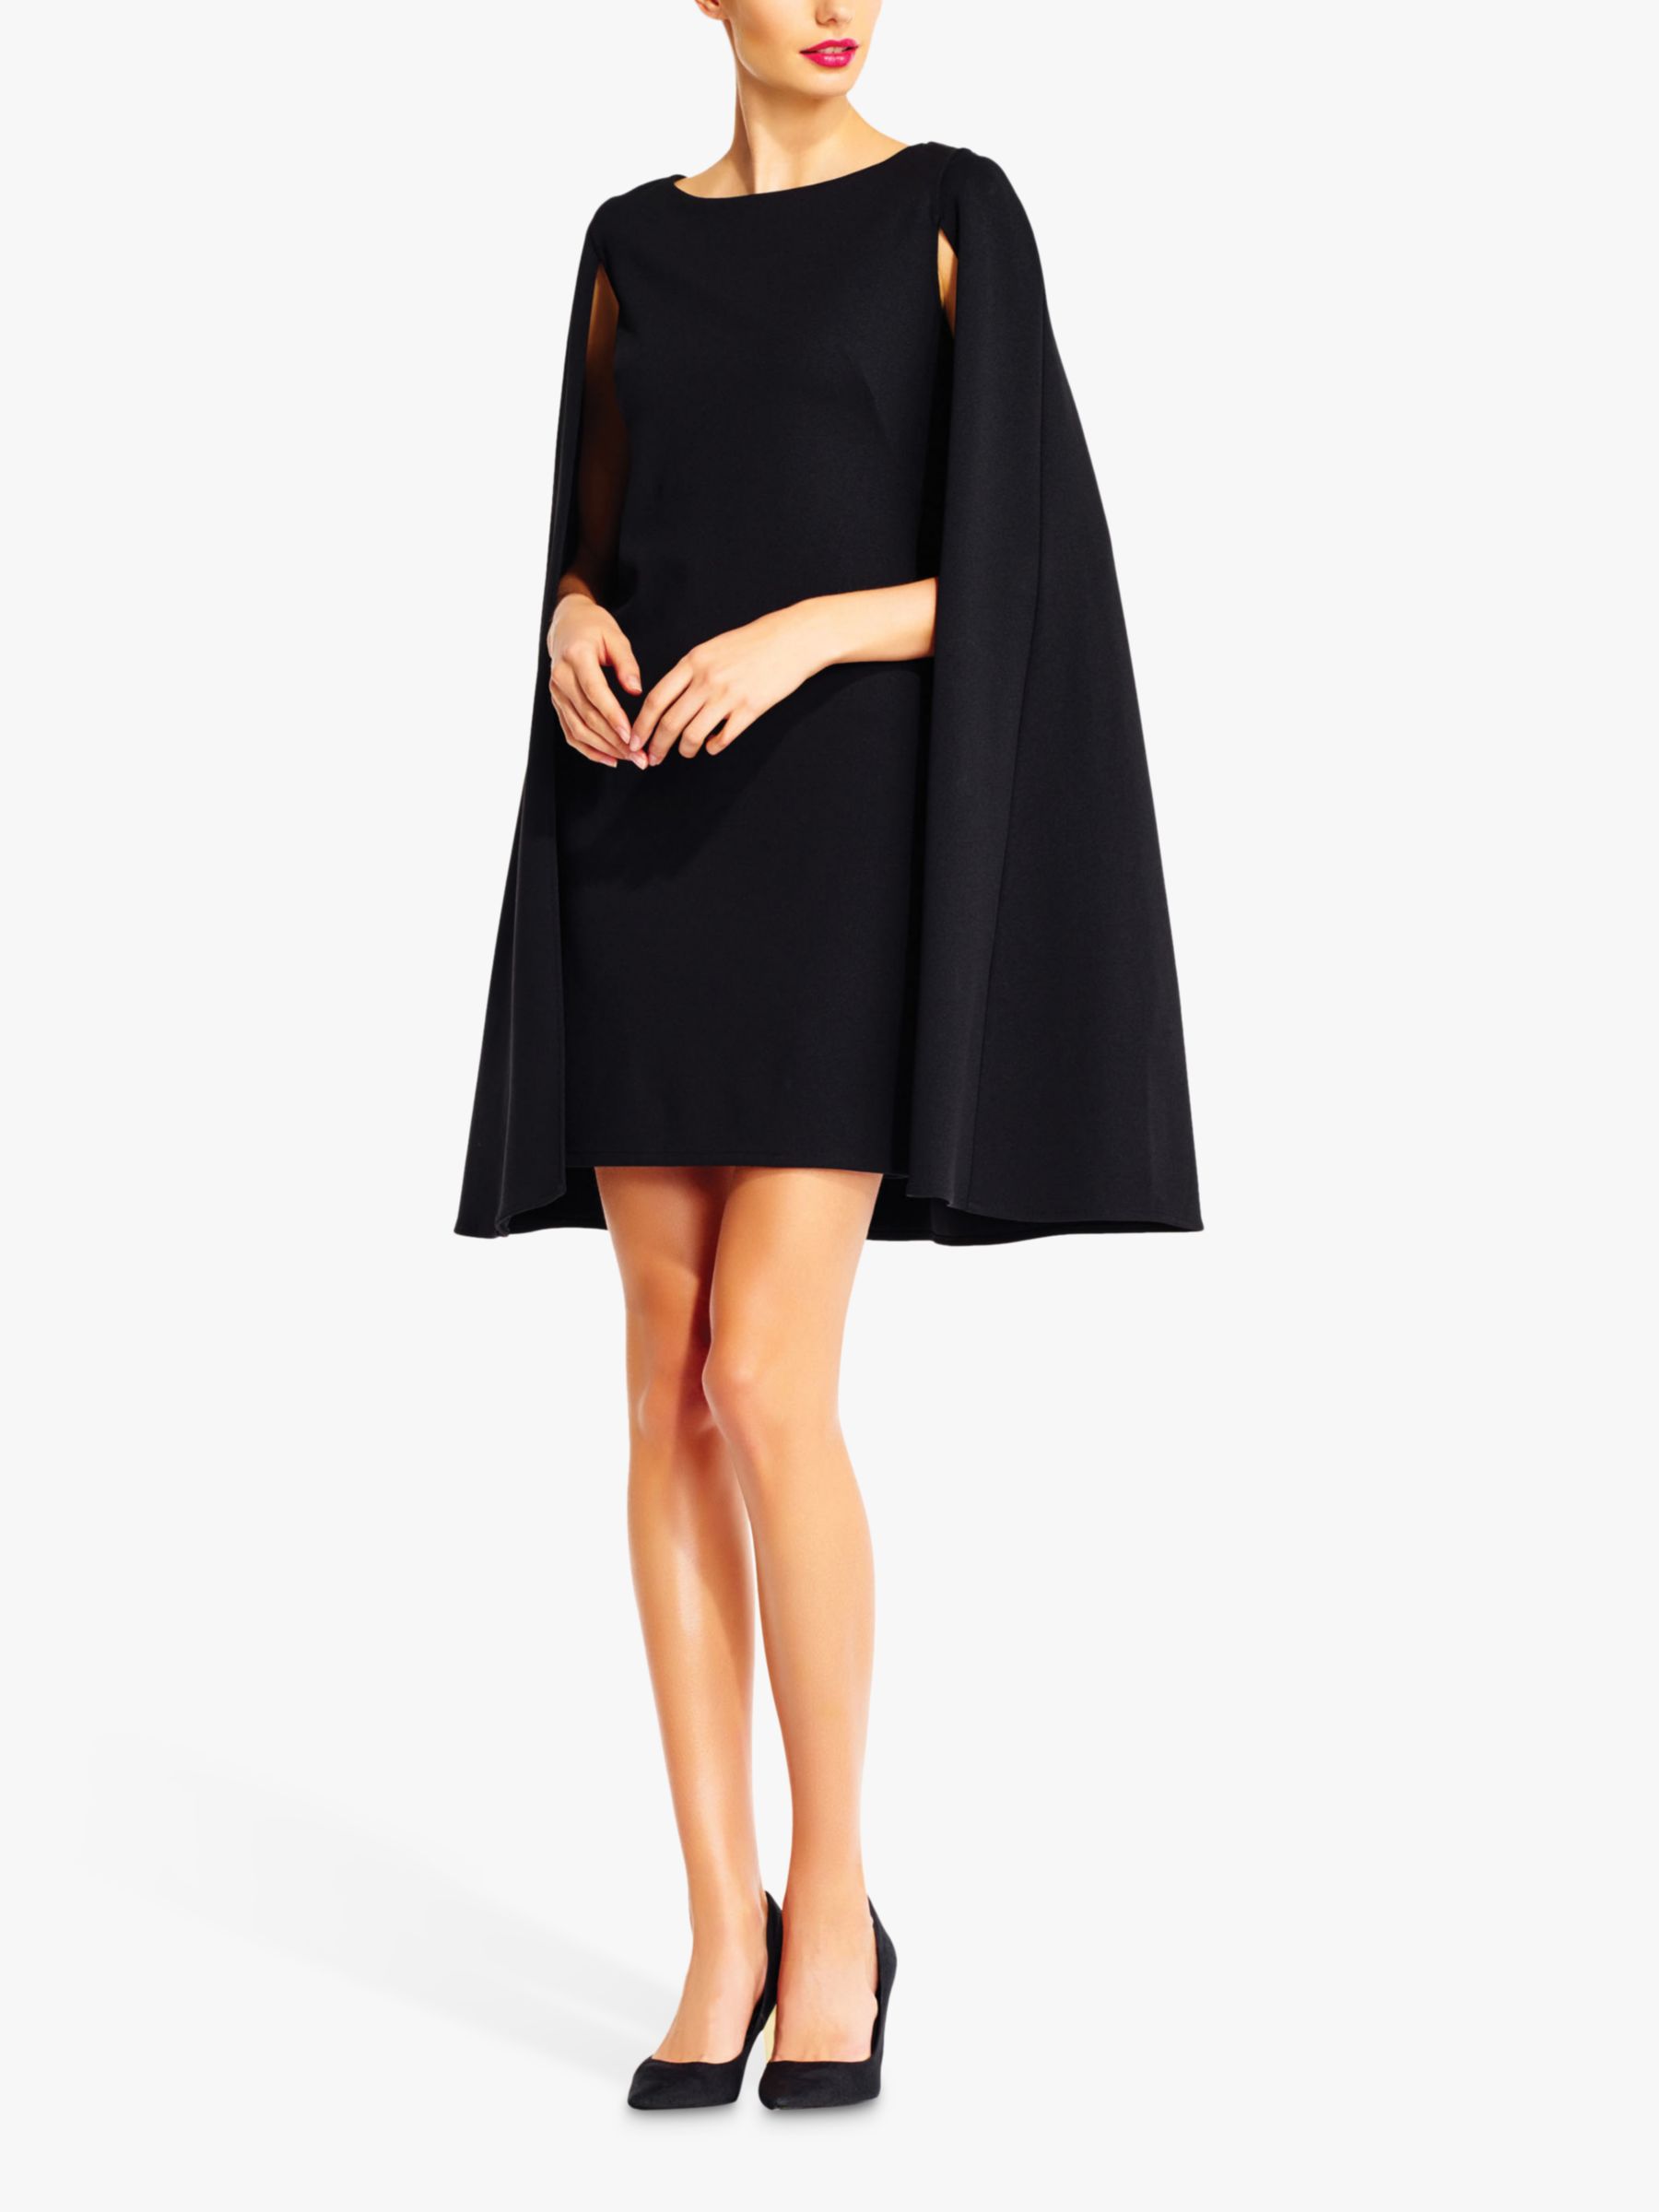 Adrianna Papell Cape Cocktail Dress, Black at John Lewis & Partners